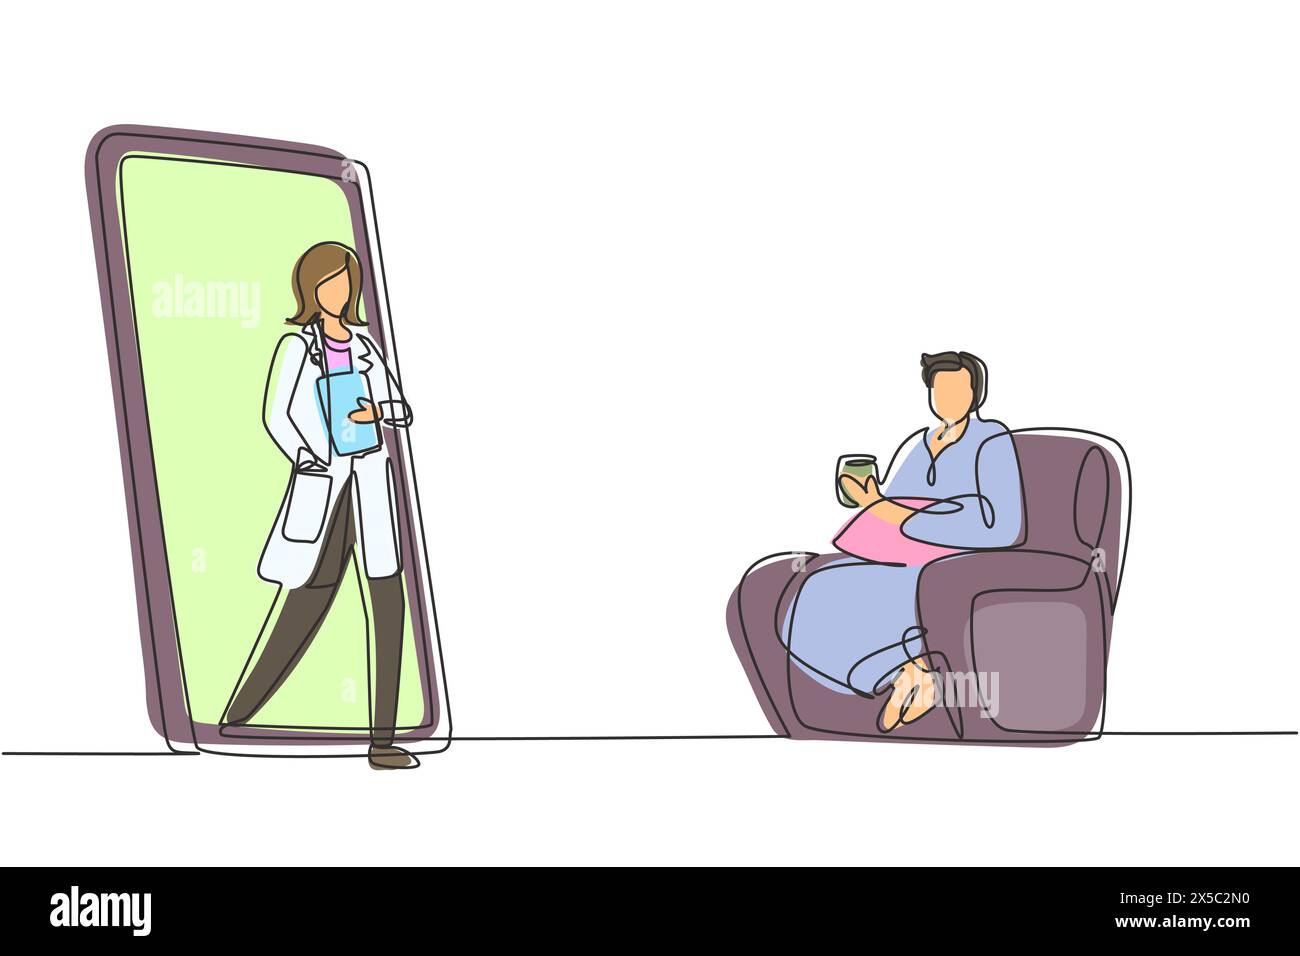 Single continuous line drawing male patient sitting curled up on sofa, using blanket, holding mug and there is female doctor walking out of smartphone Stock Vector